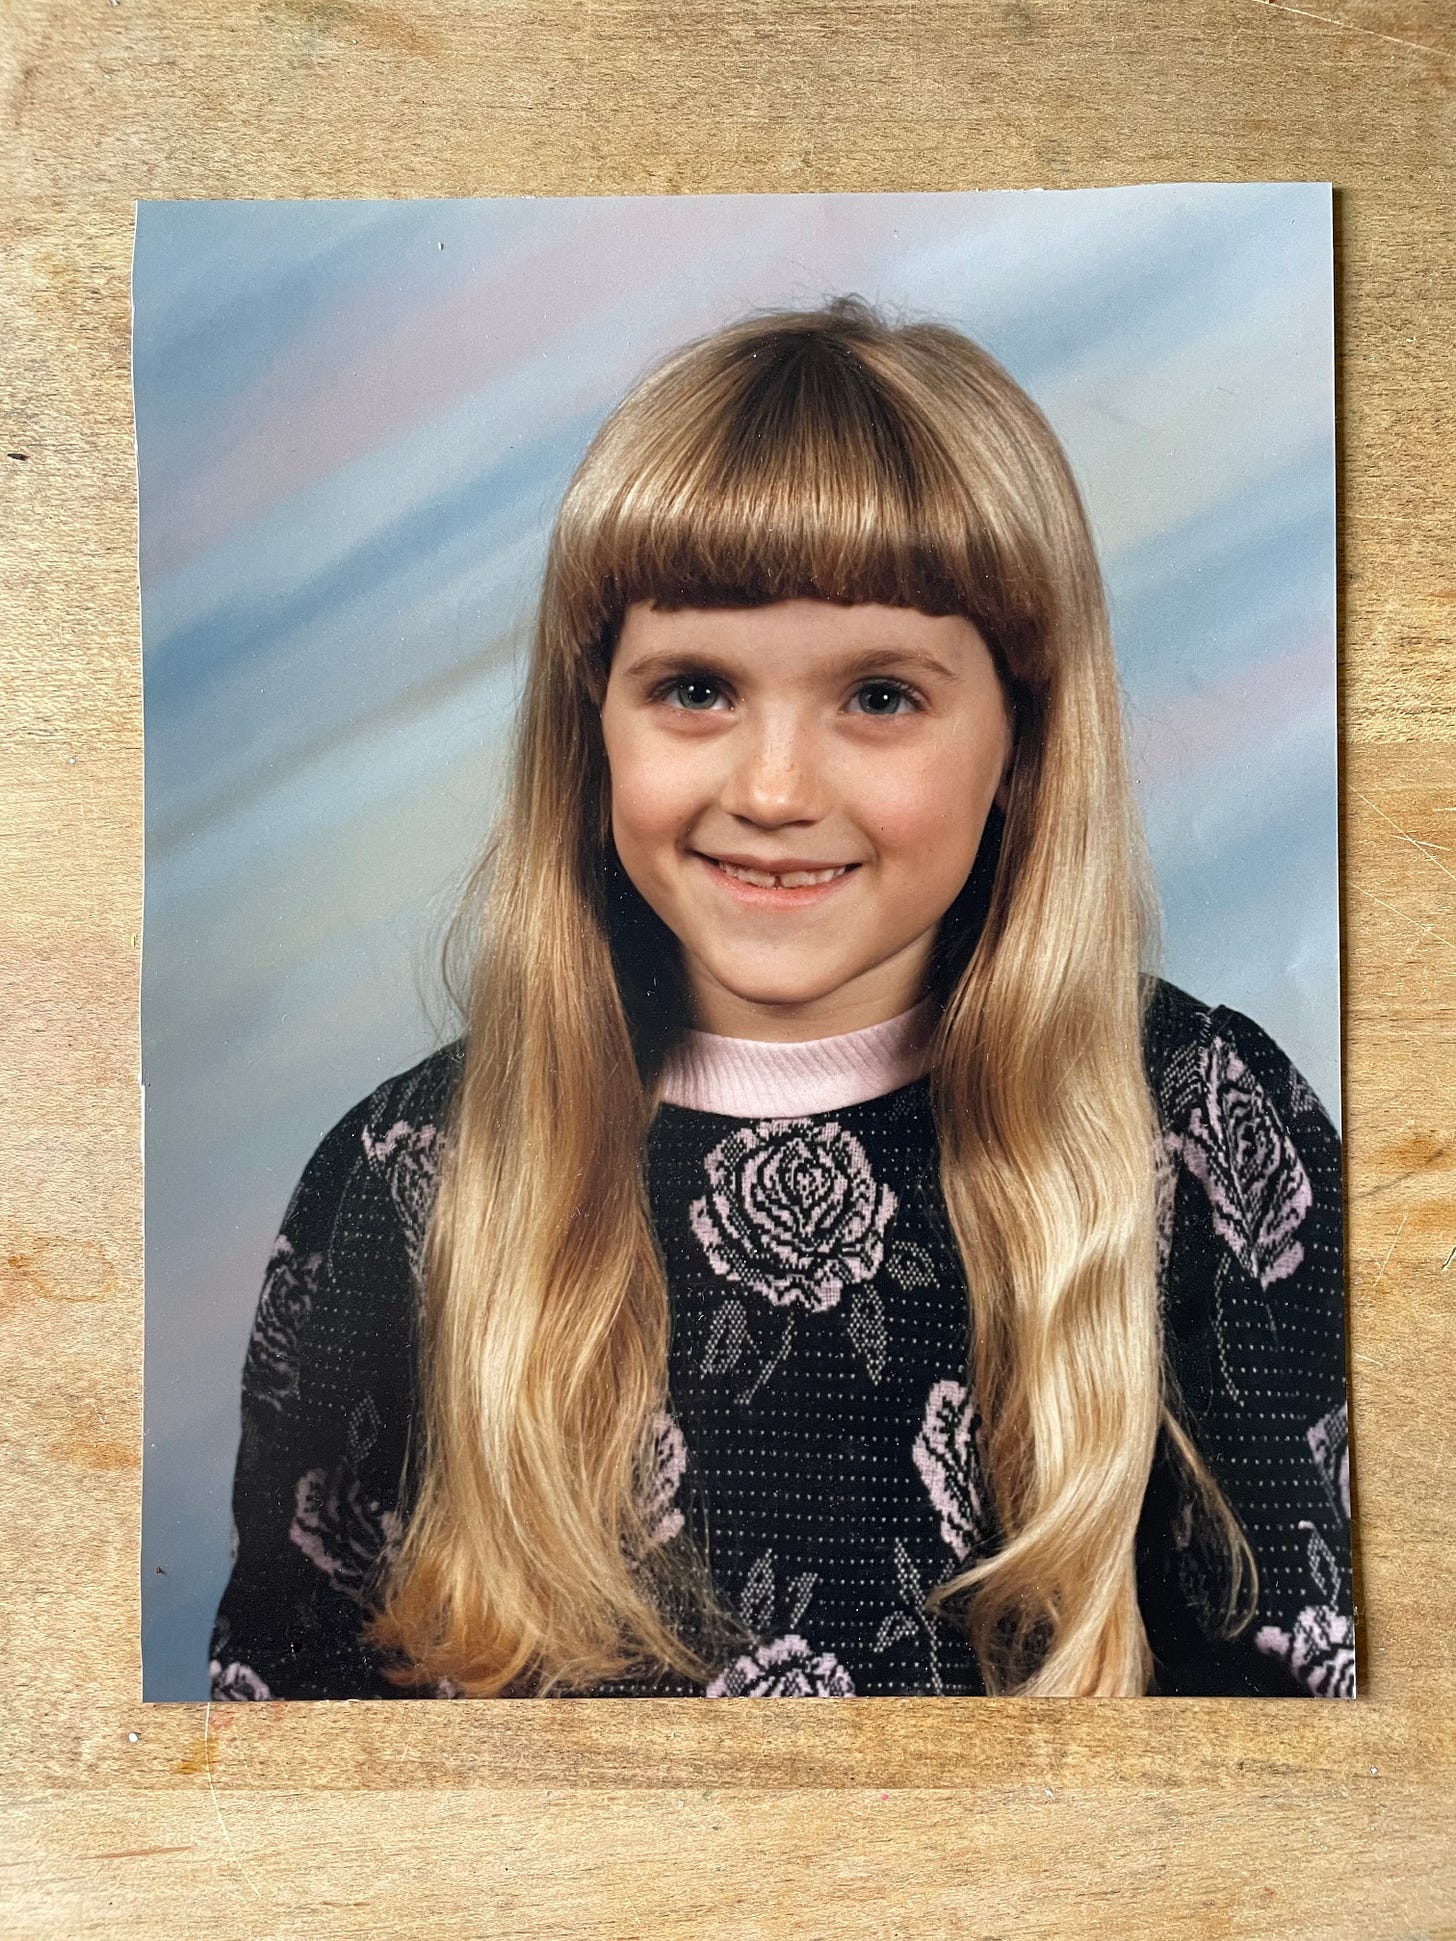 on a wooden table there is an olan mills style photograph with a purple pink background. there is a child about 8 or 9 with thick blonde bangs and hair and a gaap toothed smile. The eyes are bright but also deep. 